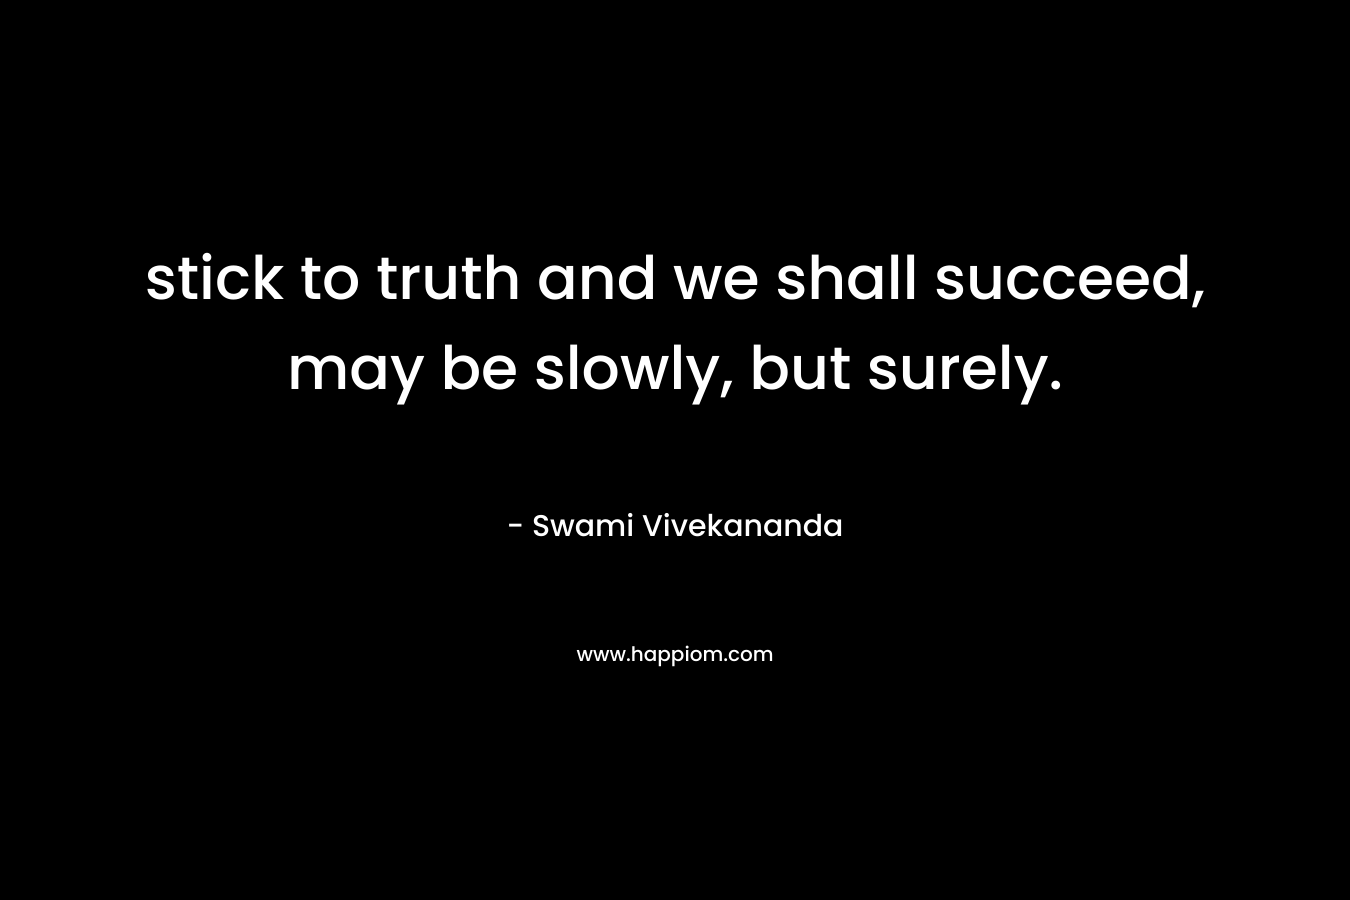 stick to truth and we shall succeed, may be slowly, but surely.